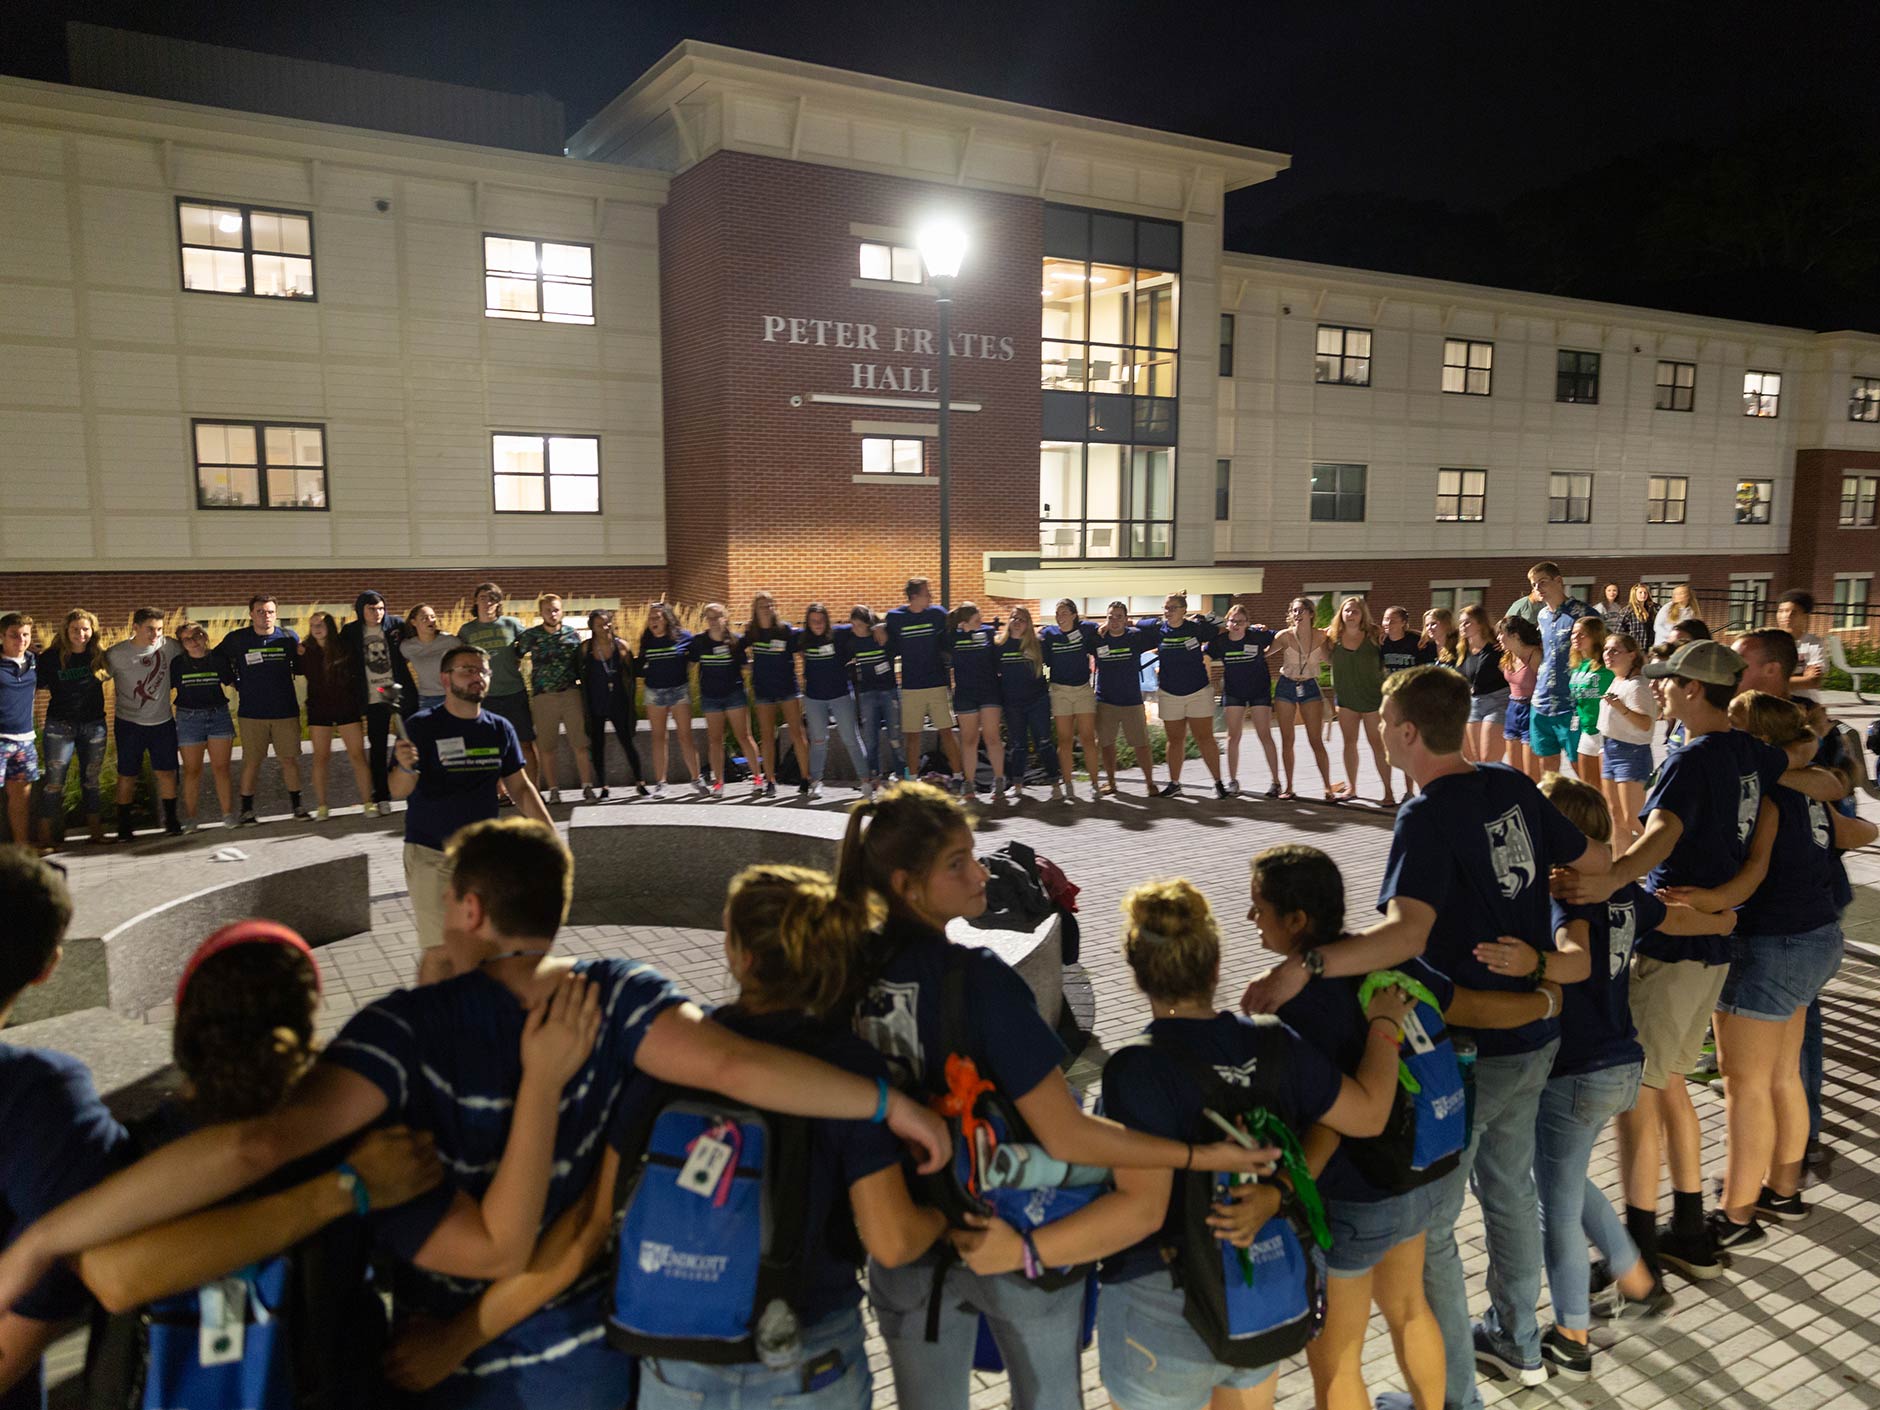 Students in a circle during orientation in front of Frates Hall during Fall orientation.